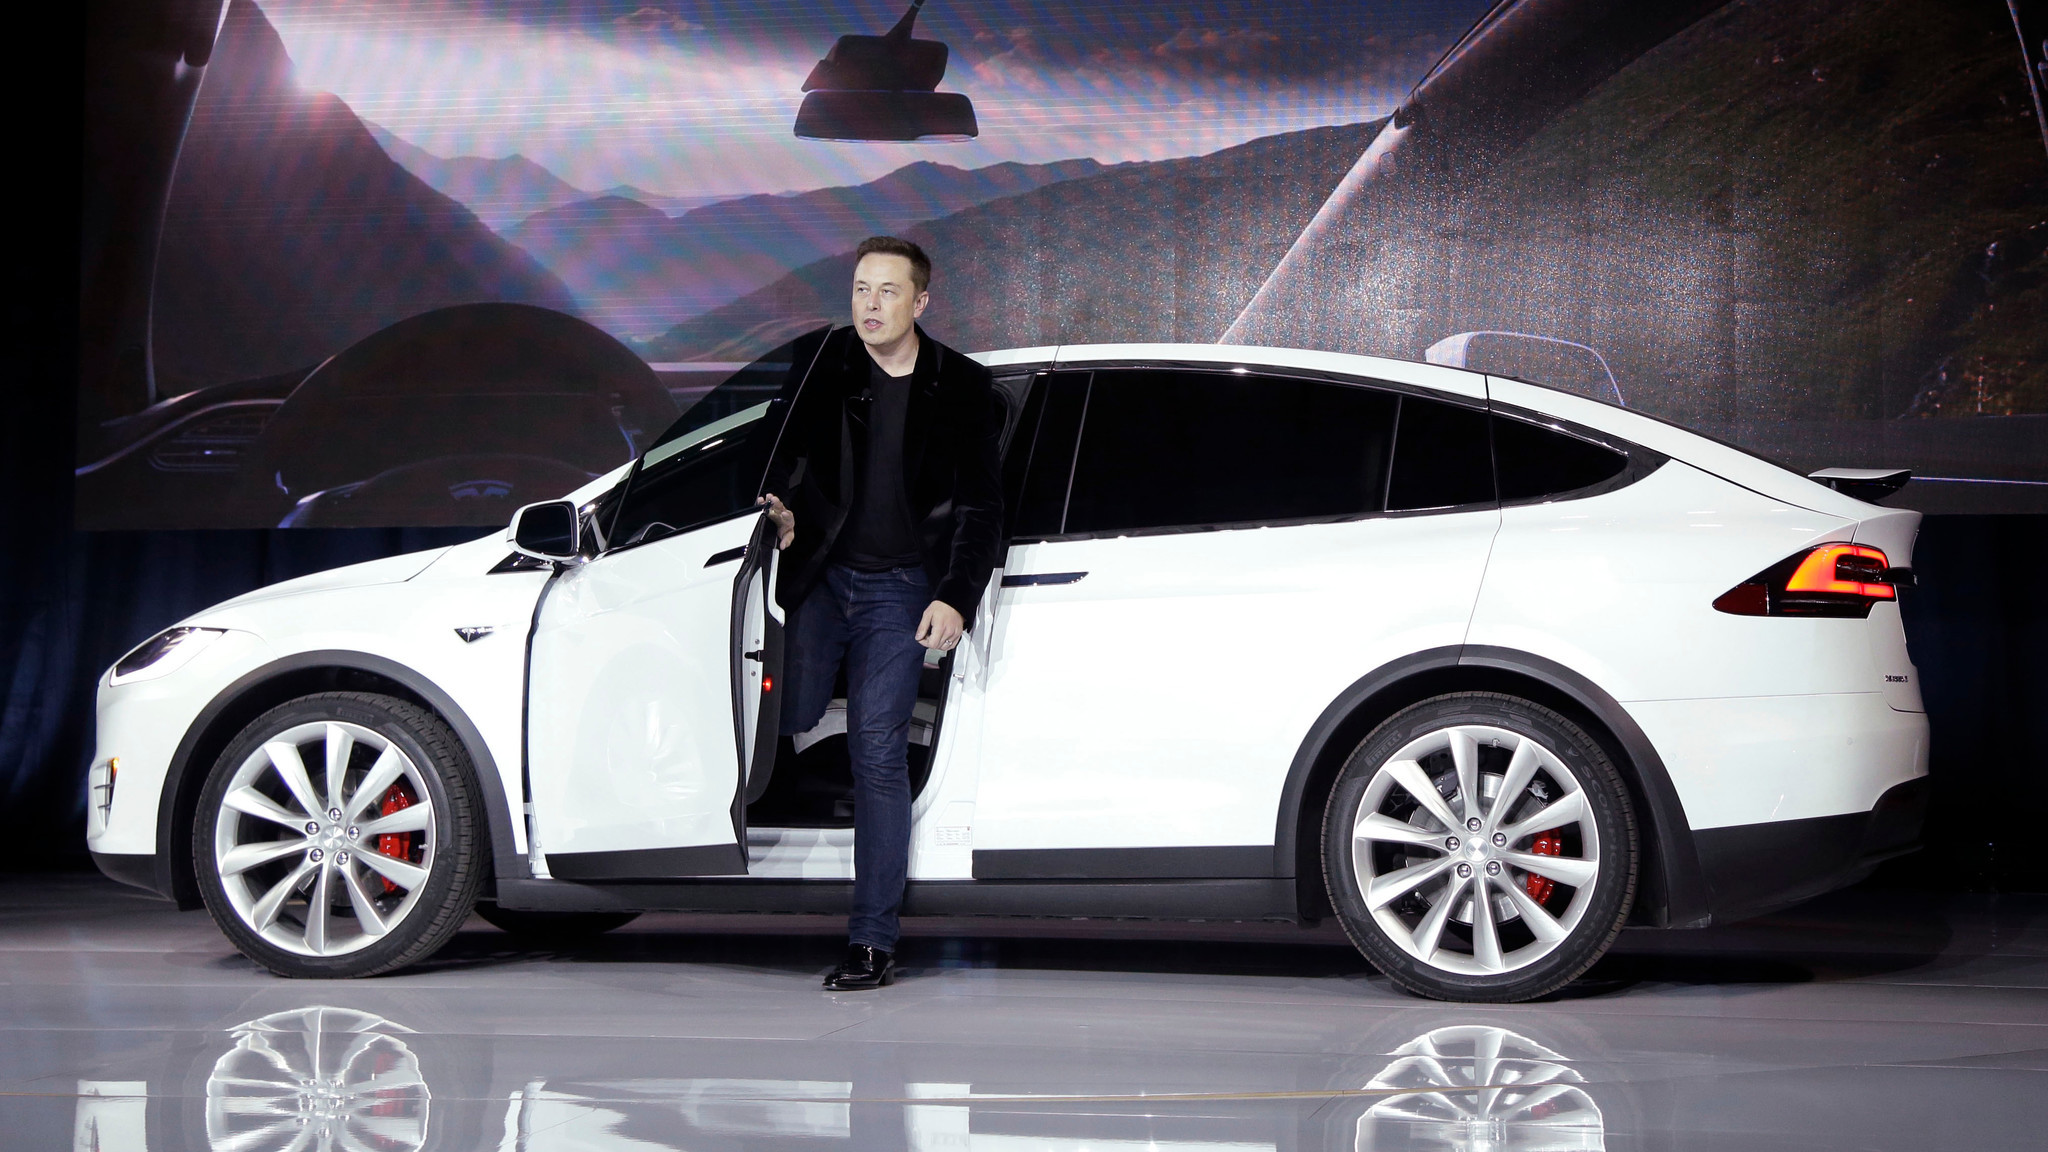 Elon Musk, CEO of Tesla Motors, introduces the carmaker's Model X at the company's manufacturing plant in Fremont, Calif., in September 2015.